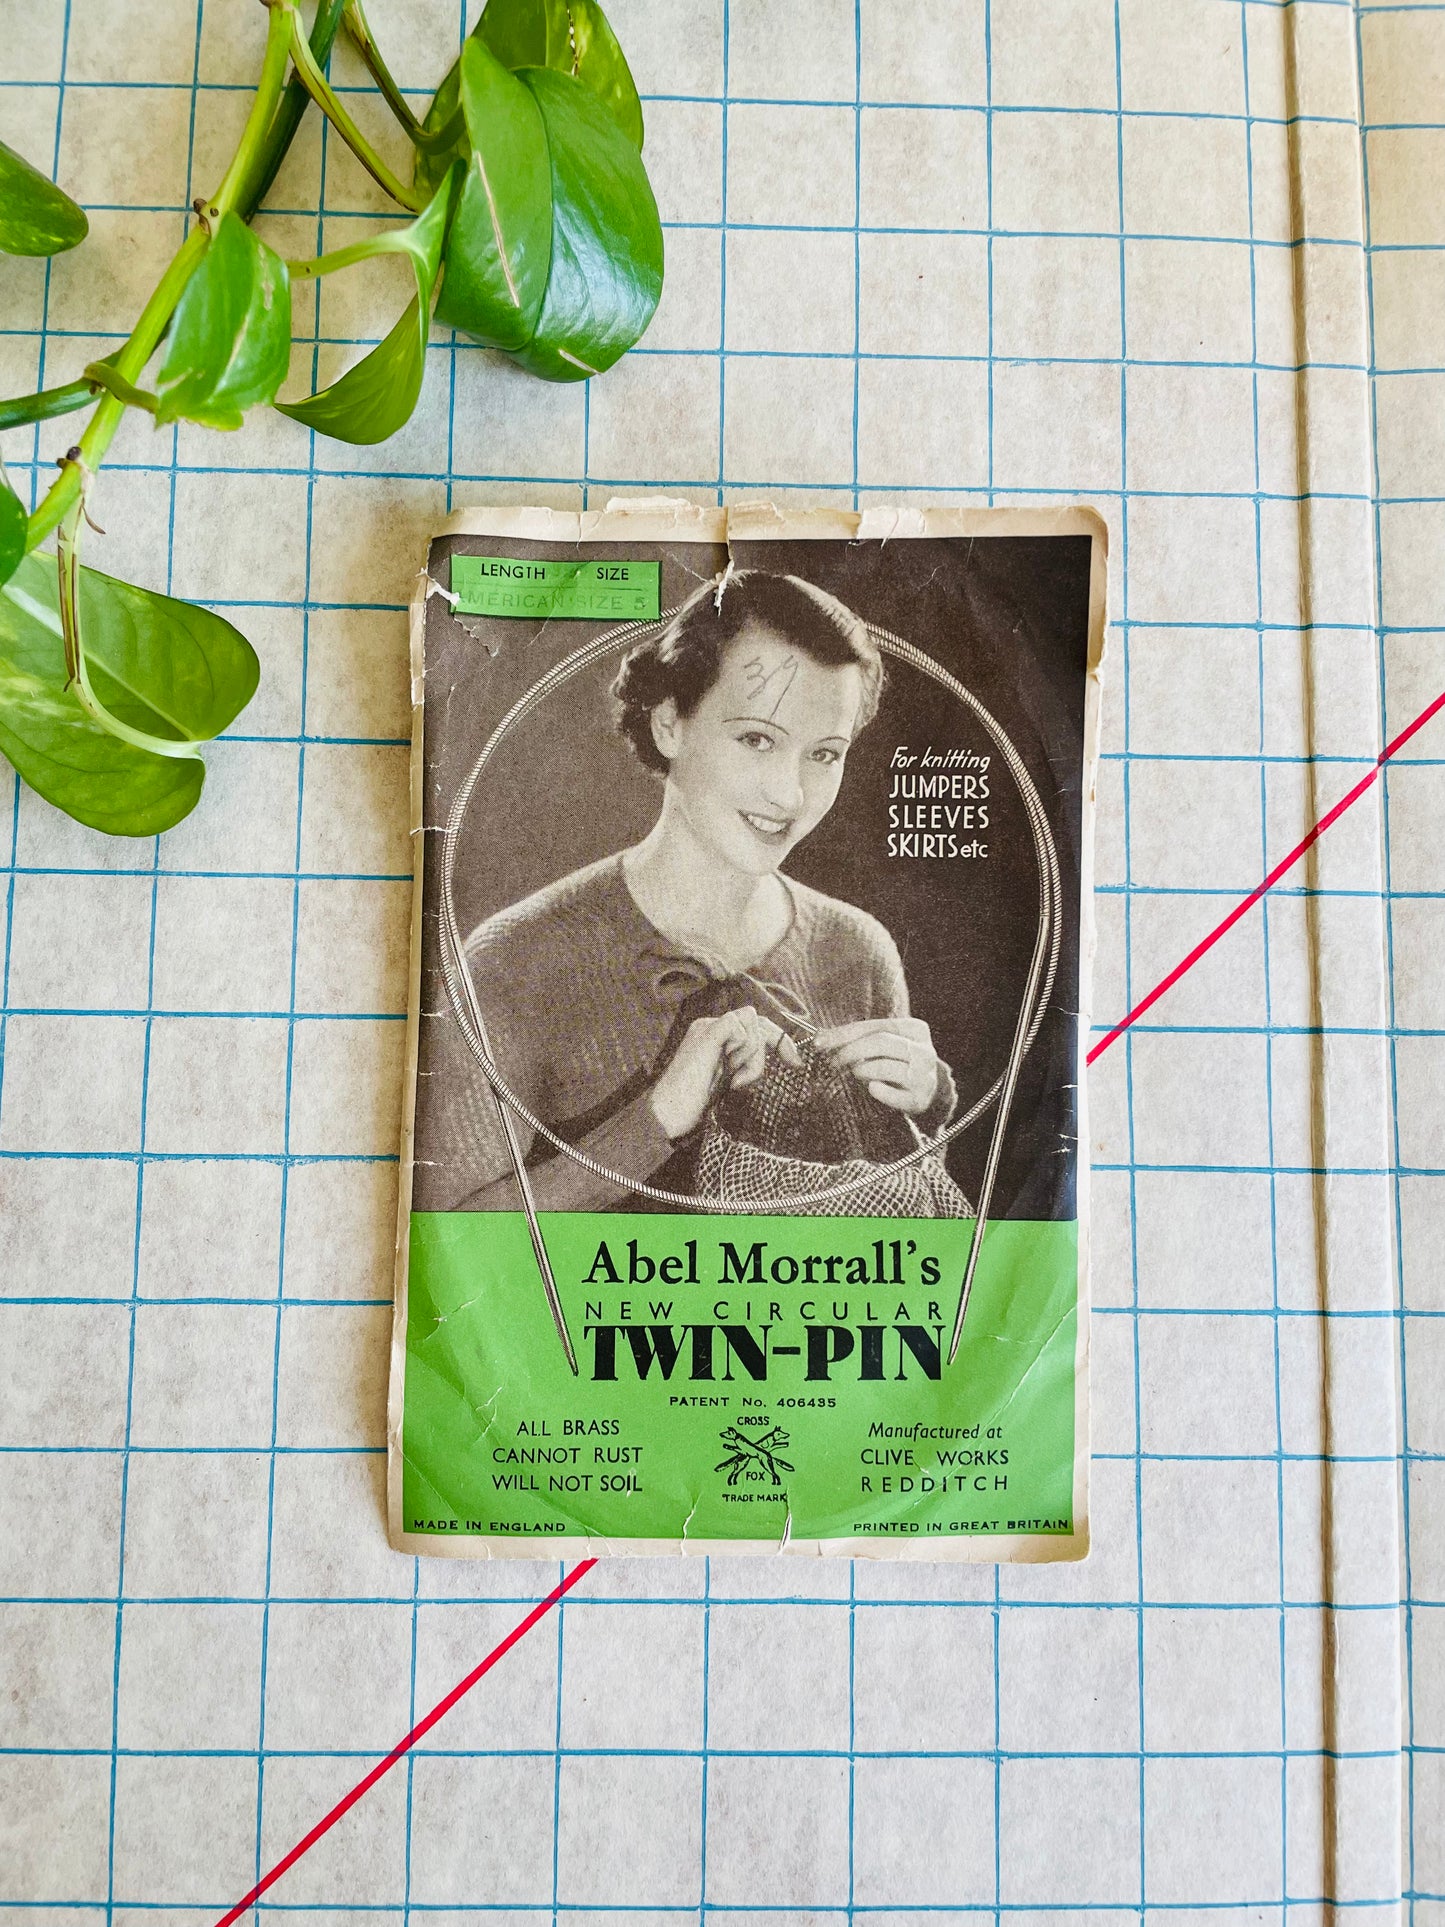 Abel Morrall's New Circular Twin-Pin for Knitting - American Size 5 - Clive Works Redditch Made in England